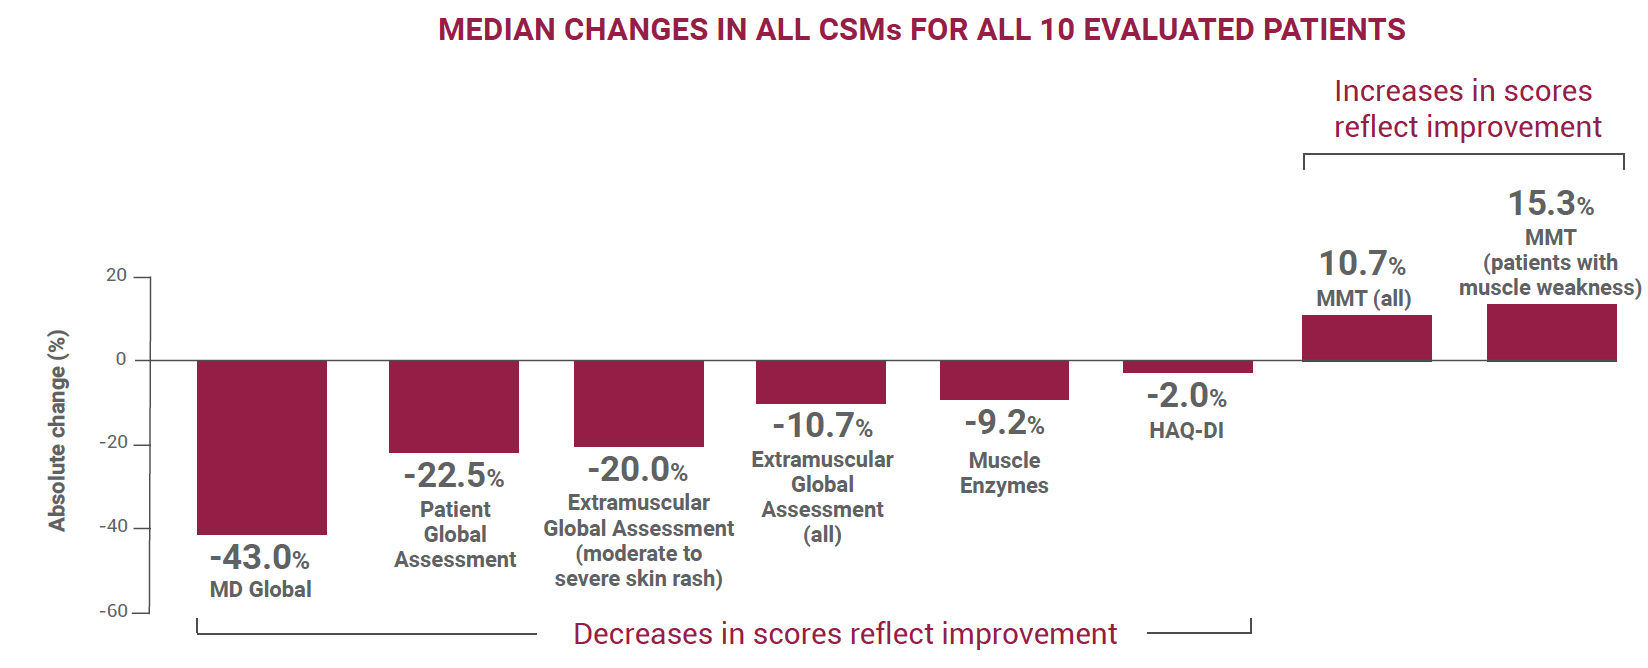 Acthar Gel DM/PM study results: median changes in all 6 core set measurements